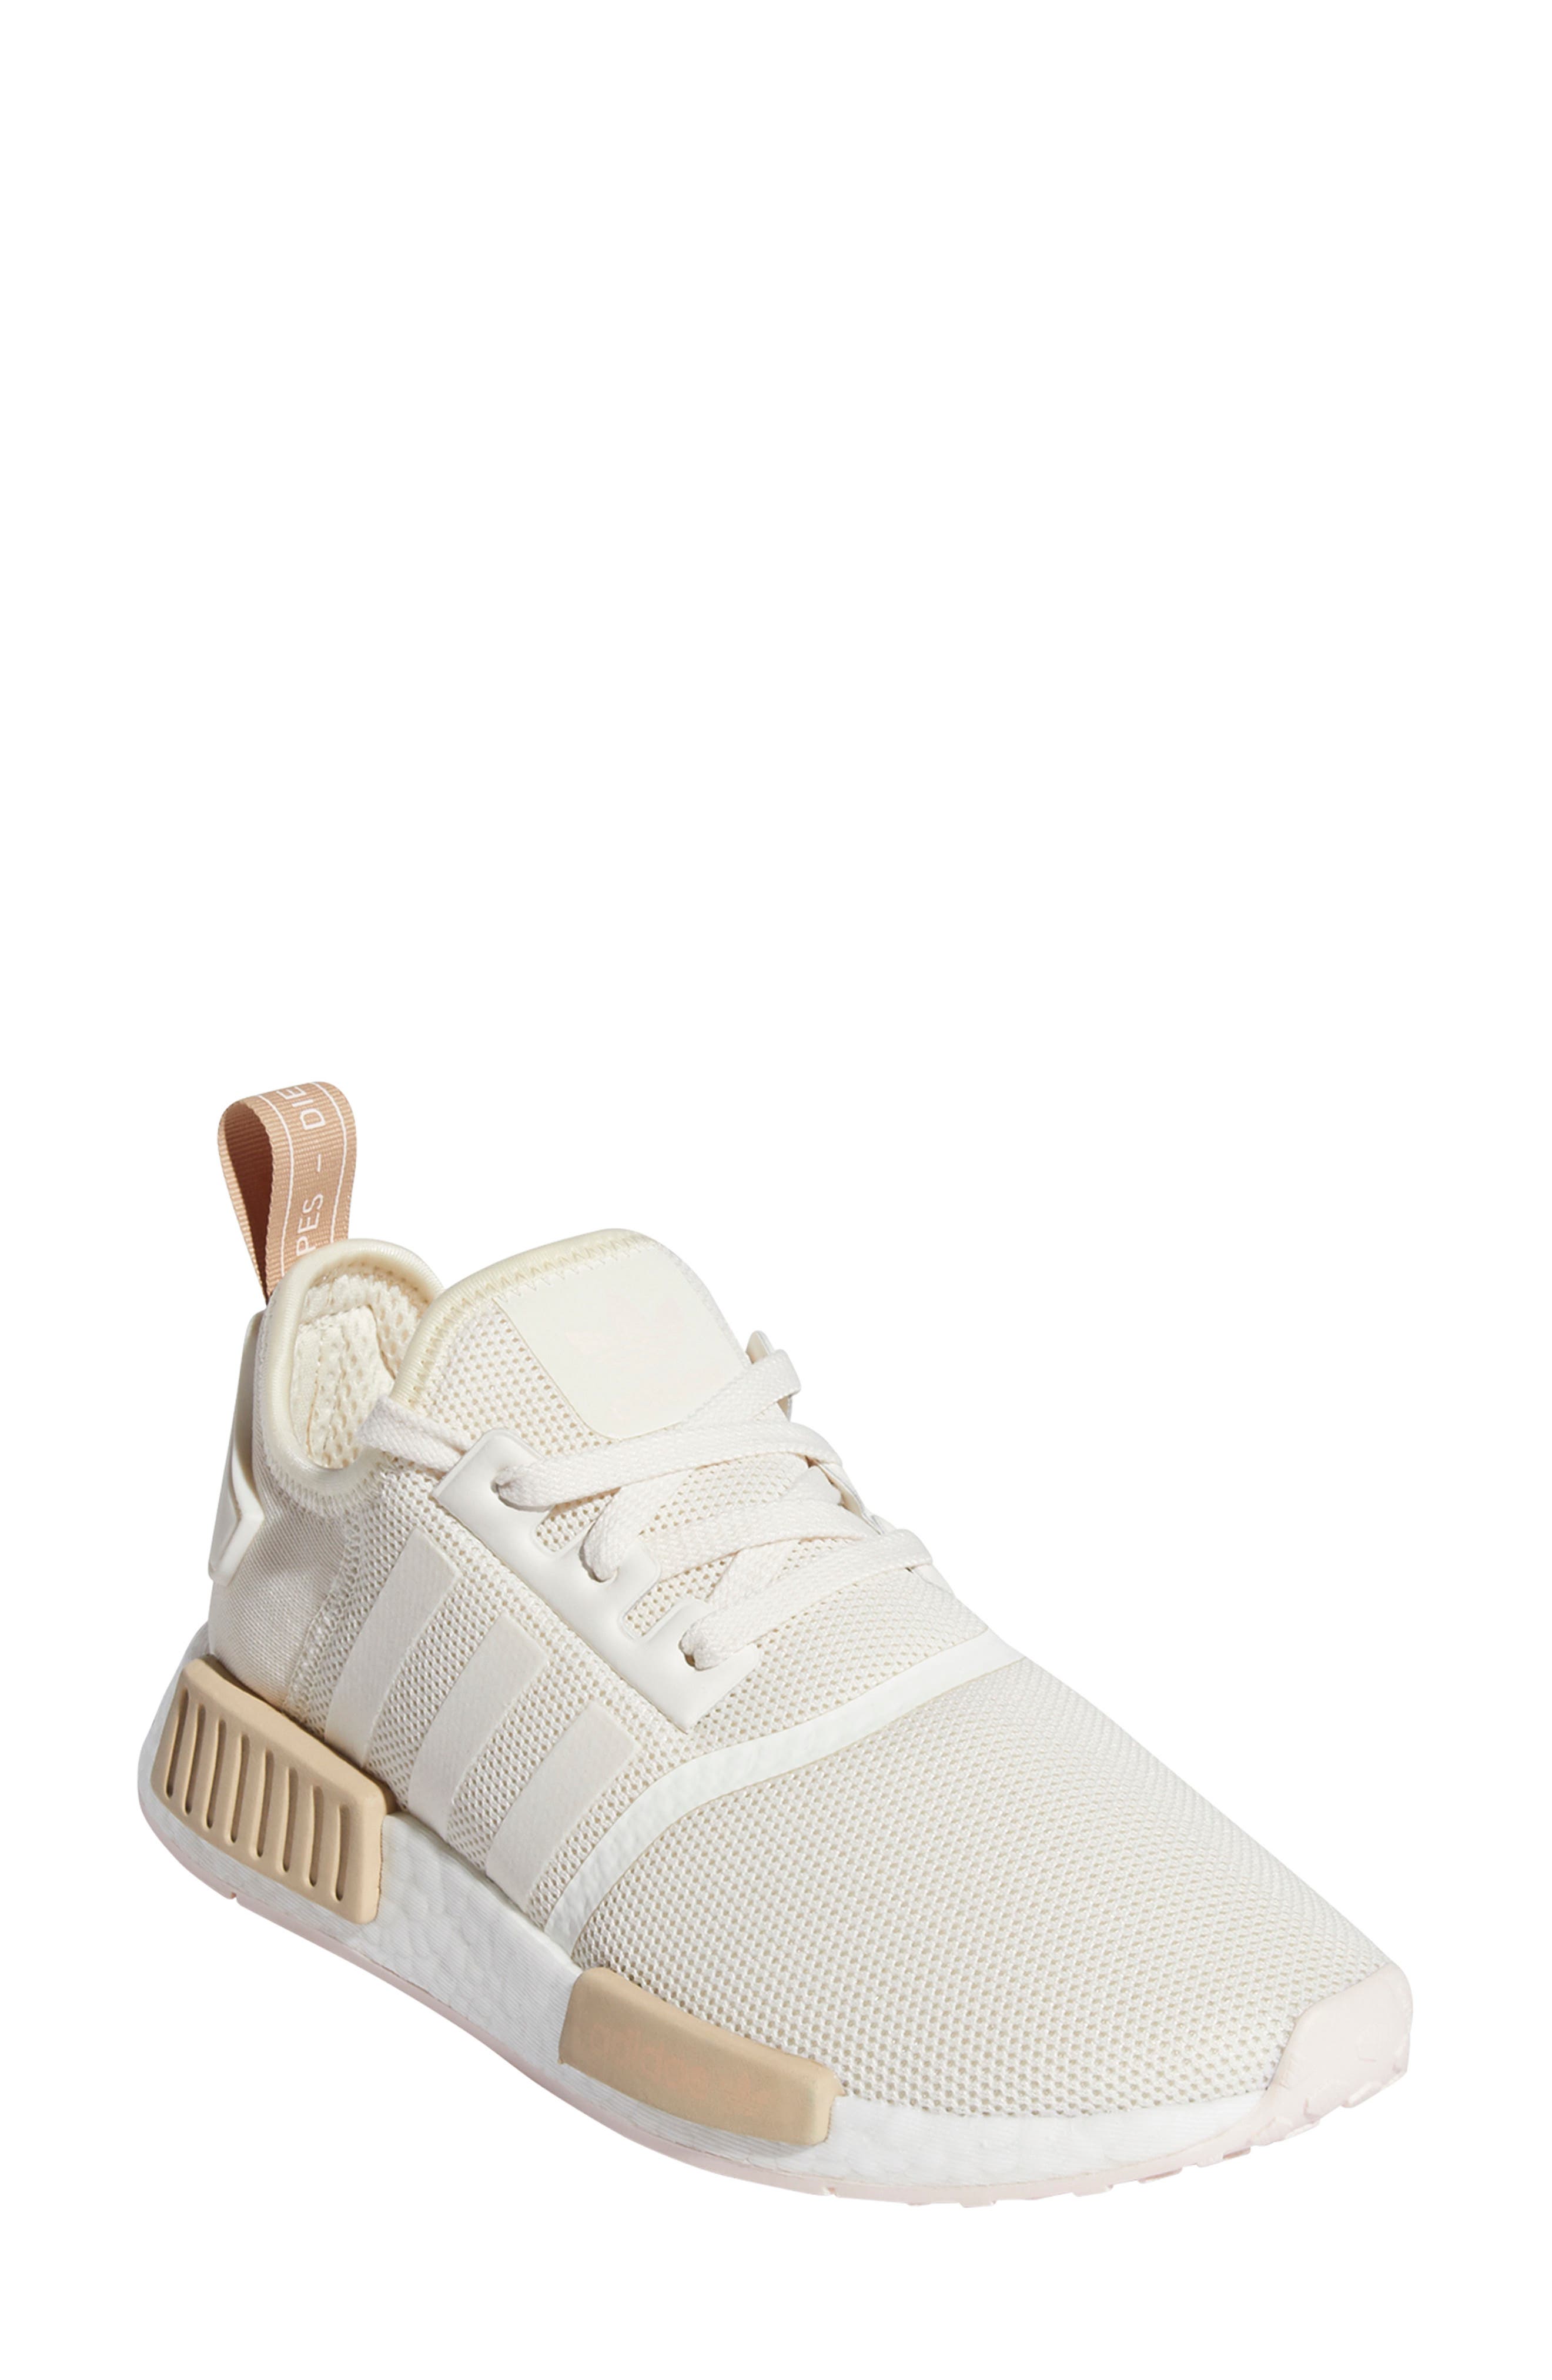 womens white sneakers nordstrom